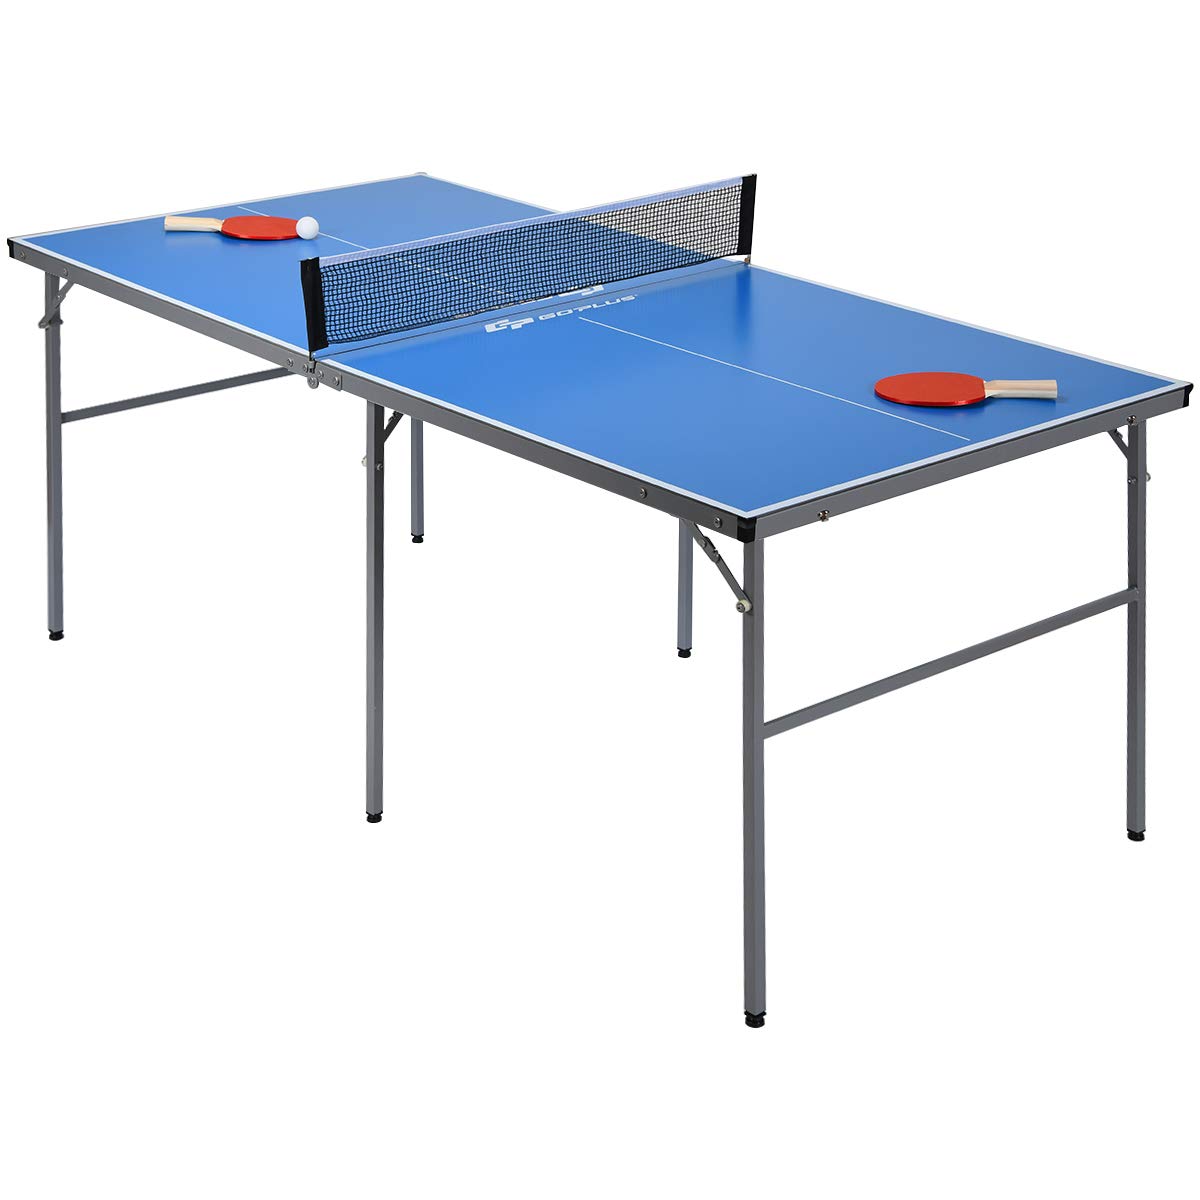 Portable Table Tennis Table, 100% Preassembled, Folding Ping Pong Table Game Set with Net